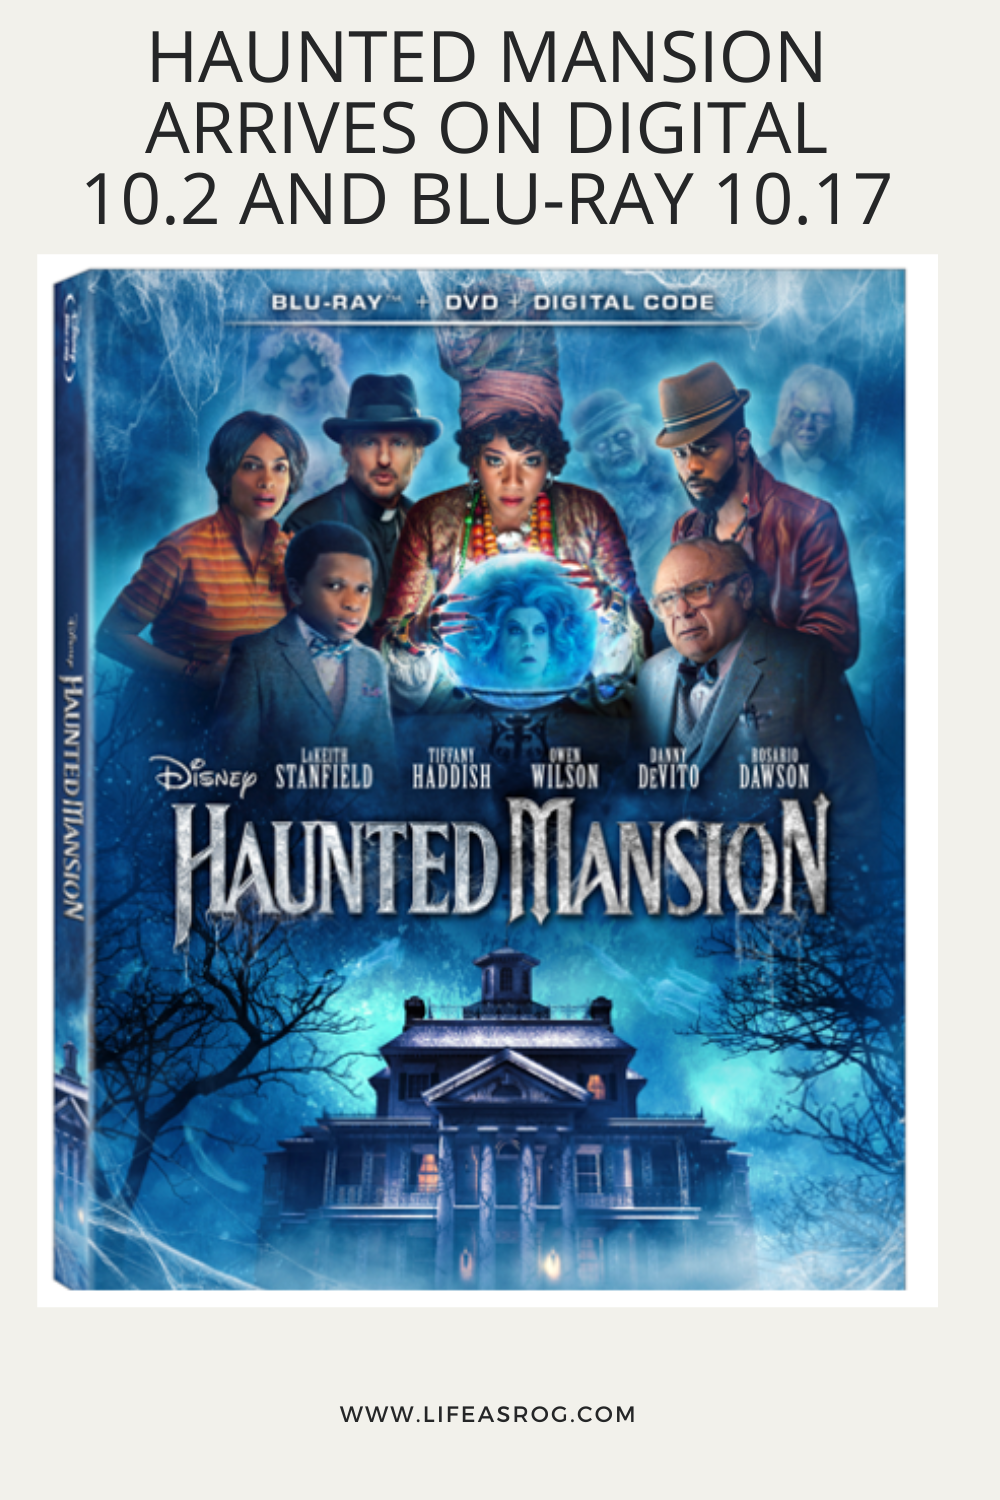 haunted mansion arrives on digital 10.2 and blu-ray 10.17